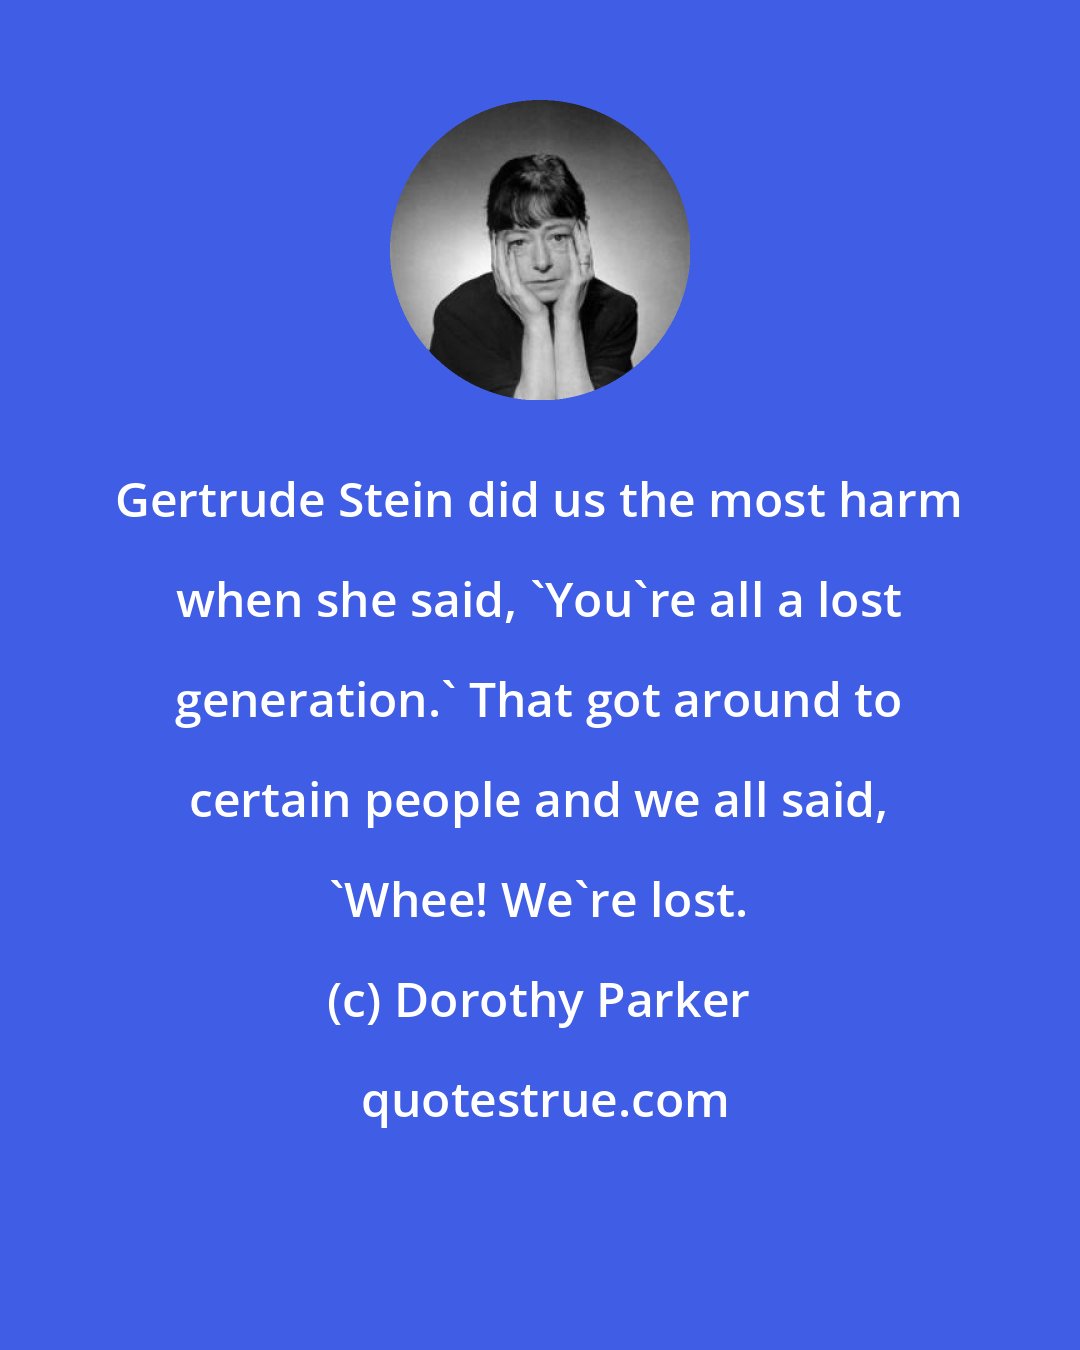 Dorothy Parker: Gertrude Stein did us the most harm when she said, 'You're all a lost generation.' That got around to certain people and we all said, 'Whee! We're lost.